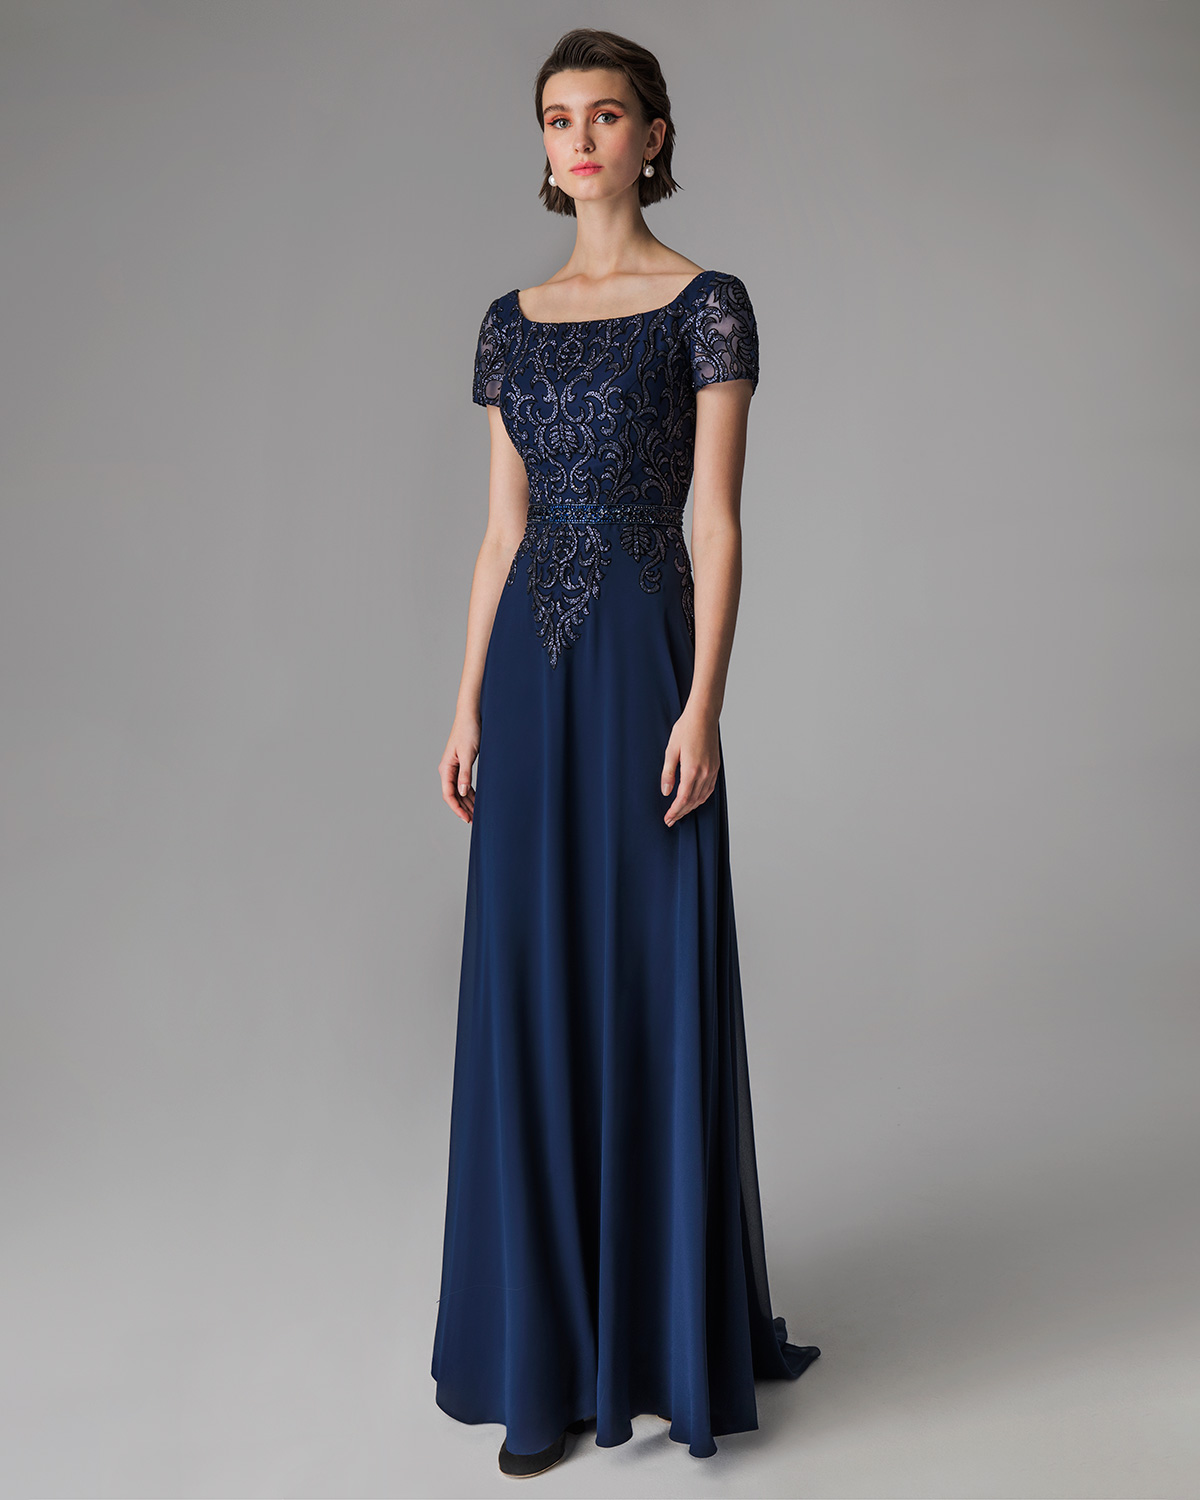 Classic Dresses / Long evening dress with lace top,  short sleeves and chiffon skirt